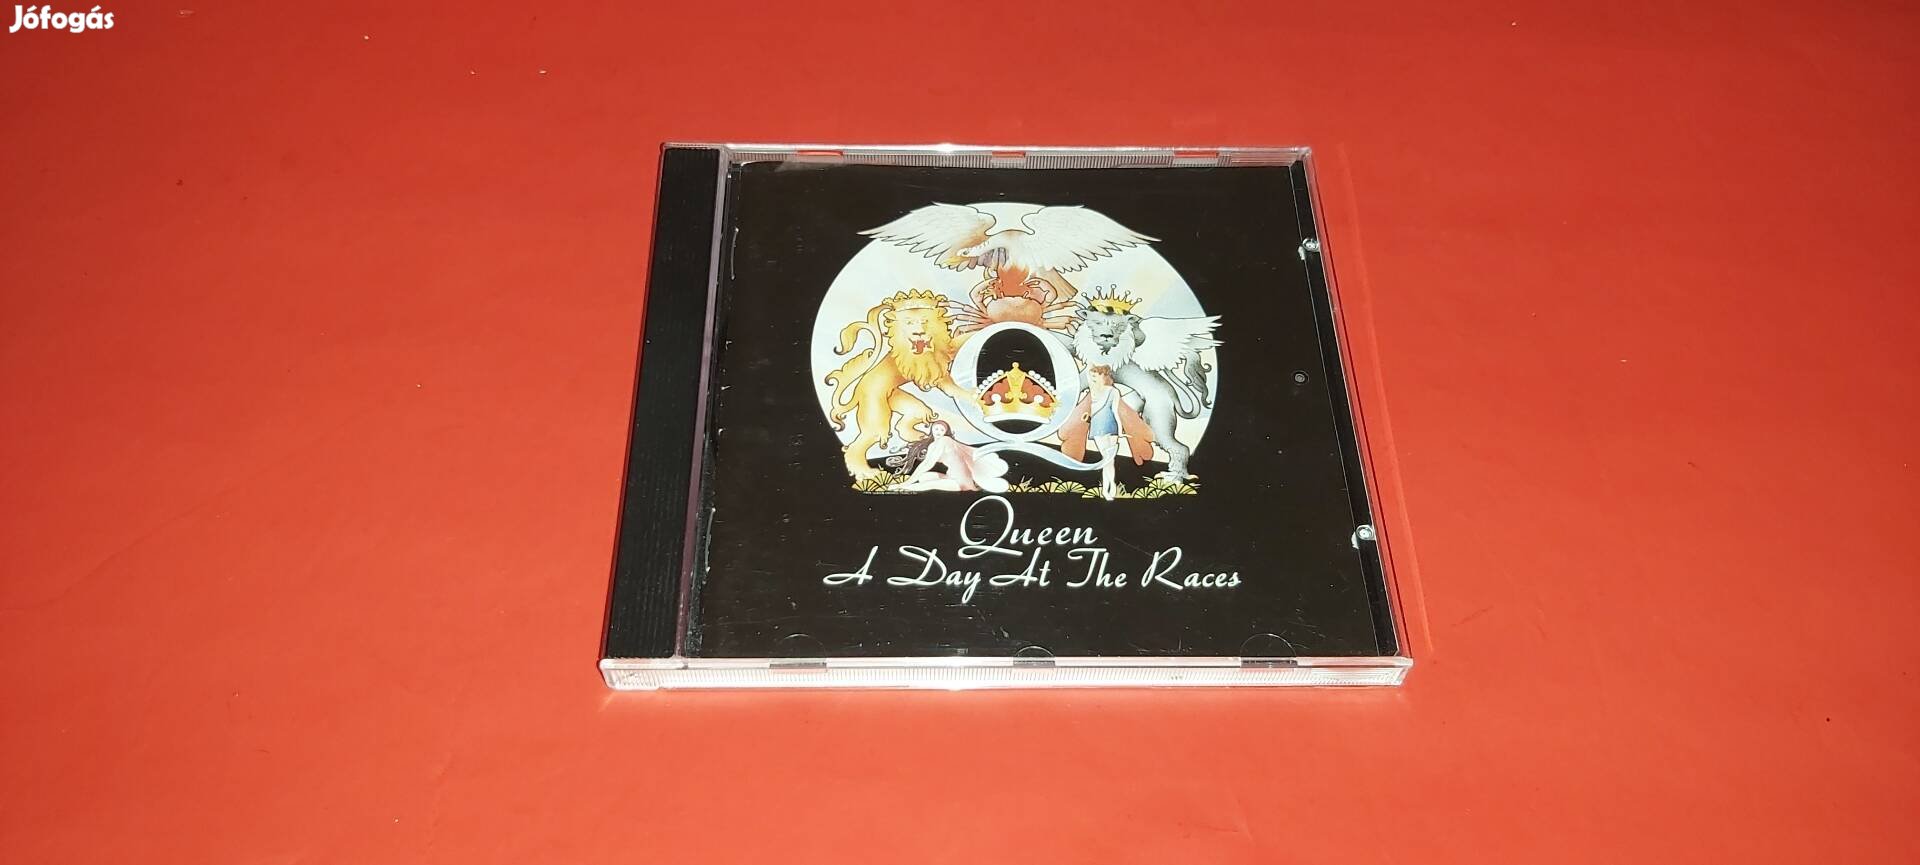 Queen A day at the races Cd 1993 Holland